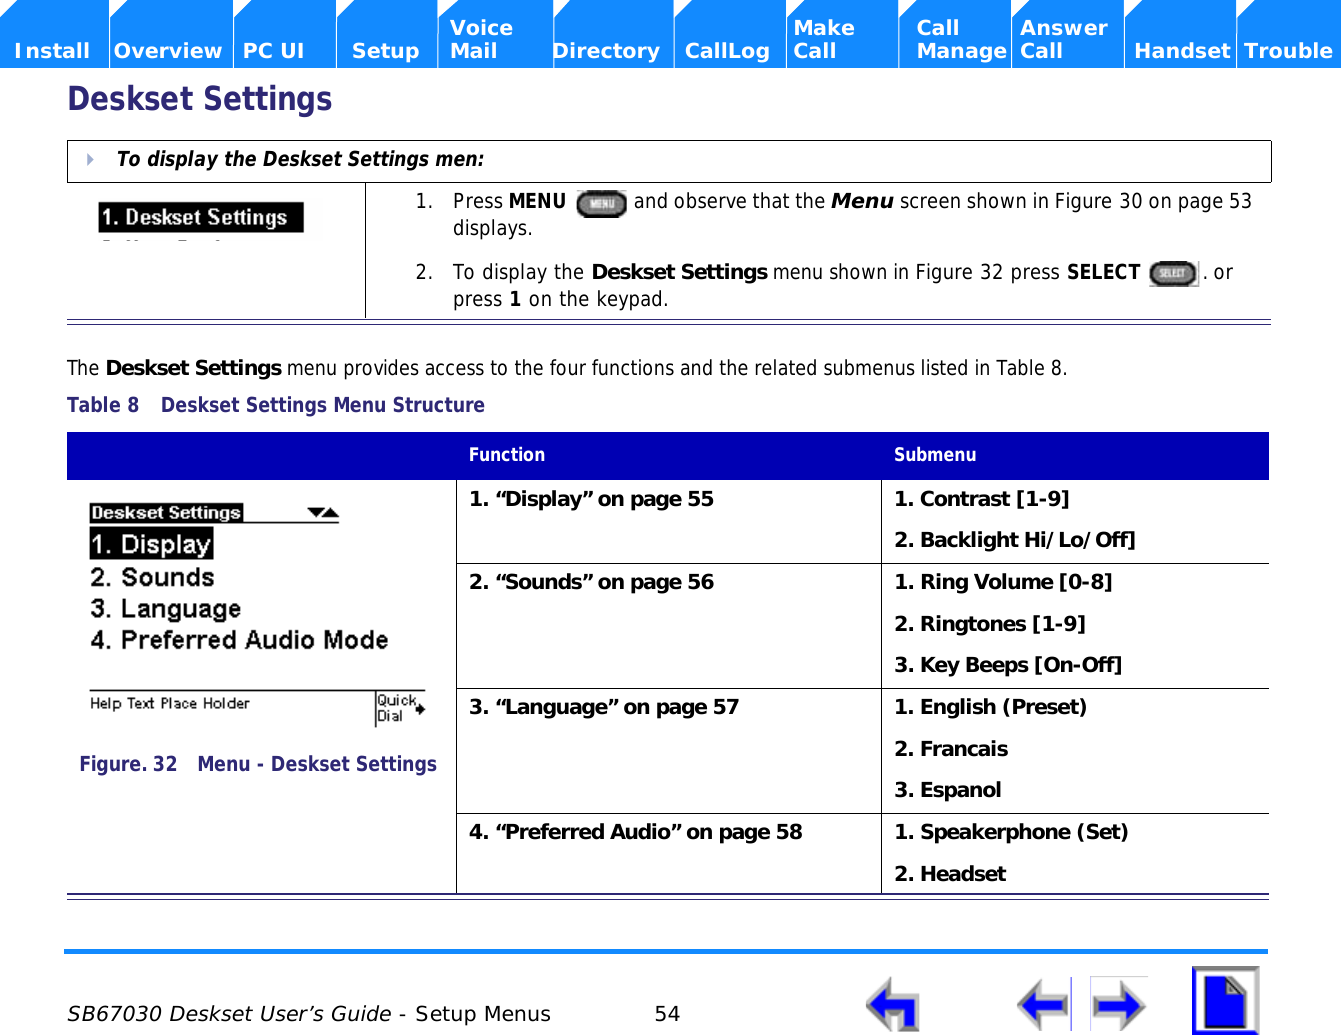  SB67030 Deskset User’s Guide - Setup Menus 54    Voice Make Call Answer  Install Overview PC UI Setup Mail Directory CallLog Call Manage Call Handset TroubleDeskset SettingsThe Deskset Settings menu provides access to the four functions and the related submenus listed in Table 8.To display the Deskset Settings men:1. Press MENU   and observe that the Menu screen shown in Figure 30 on page 53 displays.2. To display the Deskset Settings menu shown in Figure 32 press SELECT  . or press 1 on the keypad.Table 8  Deskset Settings Menu StructureFunction  Submenu1. “Display” on page 55 1. Contrast [1-9]2. Backlight Hi/Lo/Off]2. “Sounds” on page 56 1. Ring Volume [0-8]2. Ringtones [1-9]3. Key Beeps [On-Off]3. “Language” on page 57 1. English (Preset)2. Francais3. Espanol4. “Preferred Audio” on page 58 1. Speakerphone (Set)2. HeadsetFigure. 32 Menu - Deskset Settings